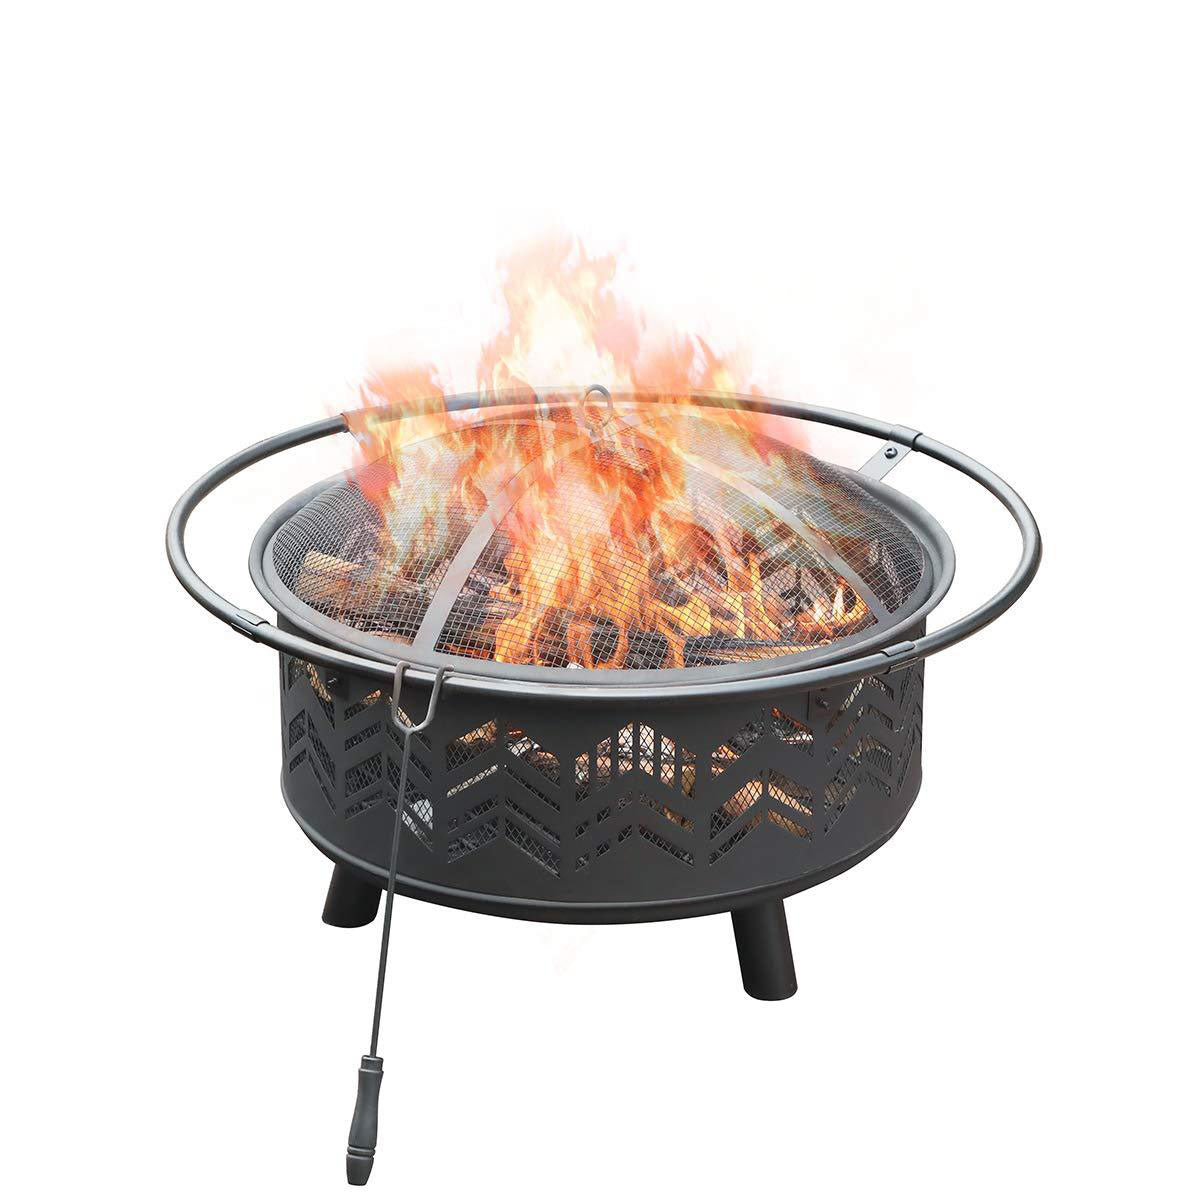 PHI VILLA 29" Fire Pit Large Steel Patio Fireplace Cutouts Pattern, Poker & Spark Screen Included